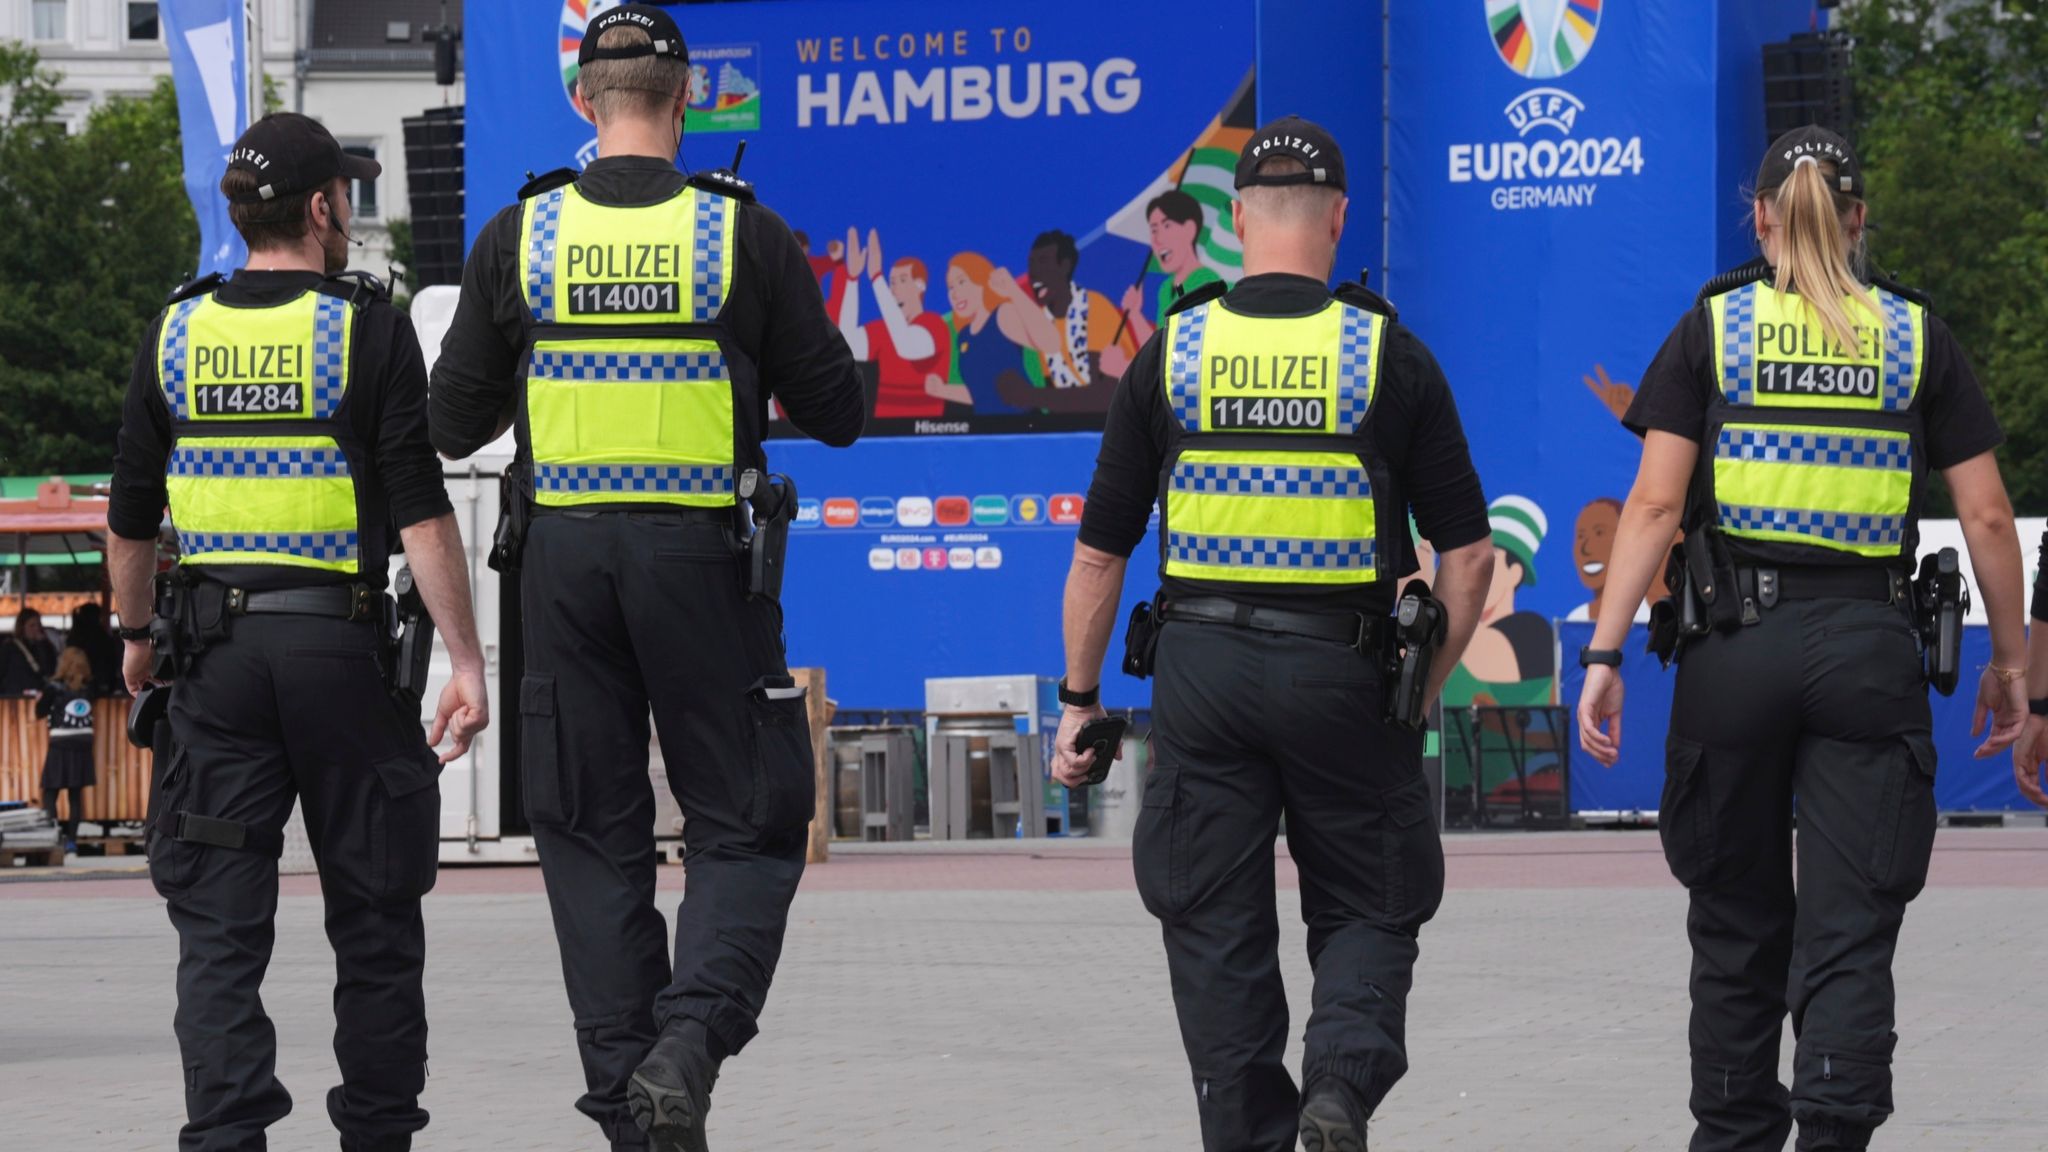 Dramatic Incident Near Euro 2024: Dutch Fans Witness Police Shooting in Hamburg